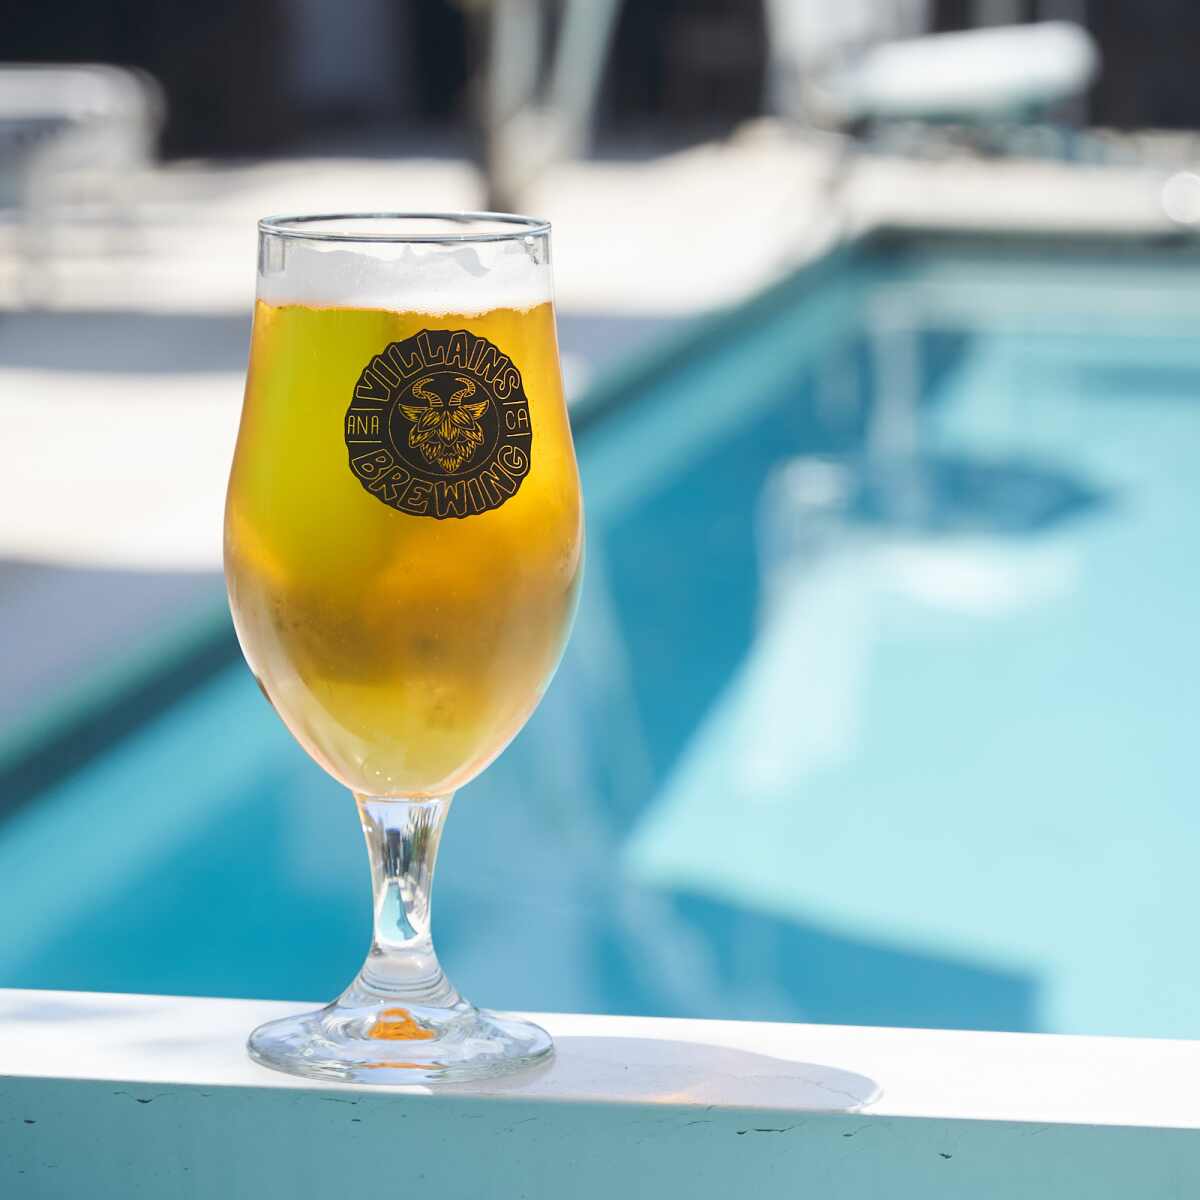 A glass of beer at Villains Brewing Co. in front of a swimming pool.